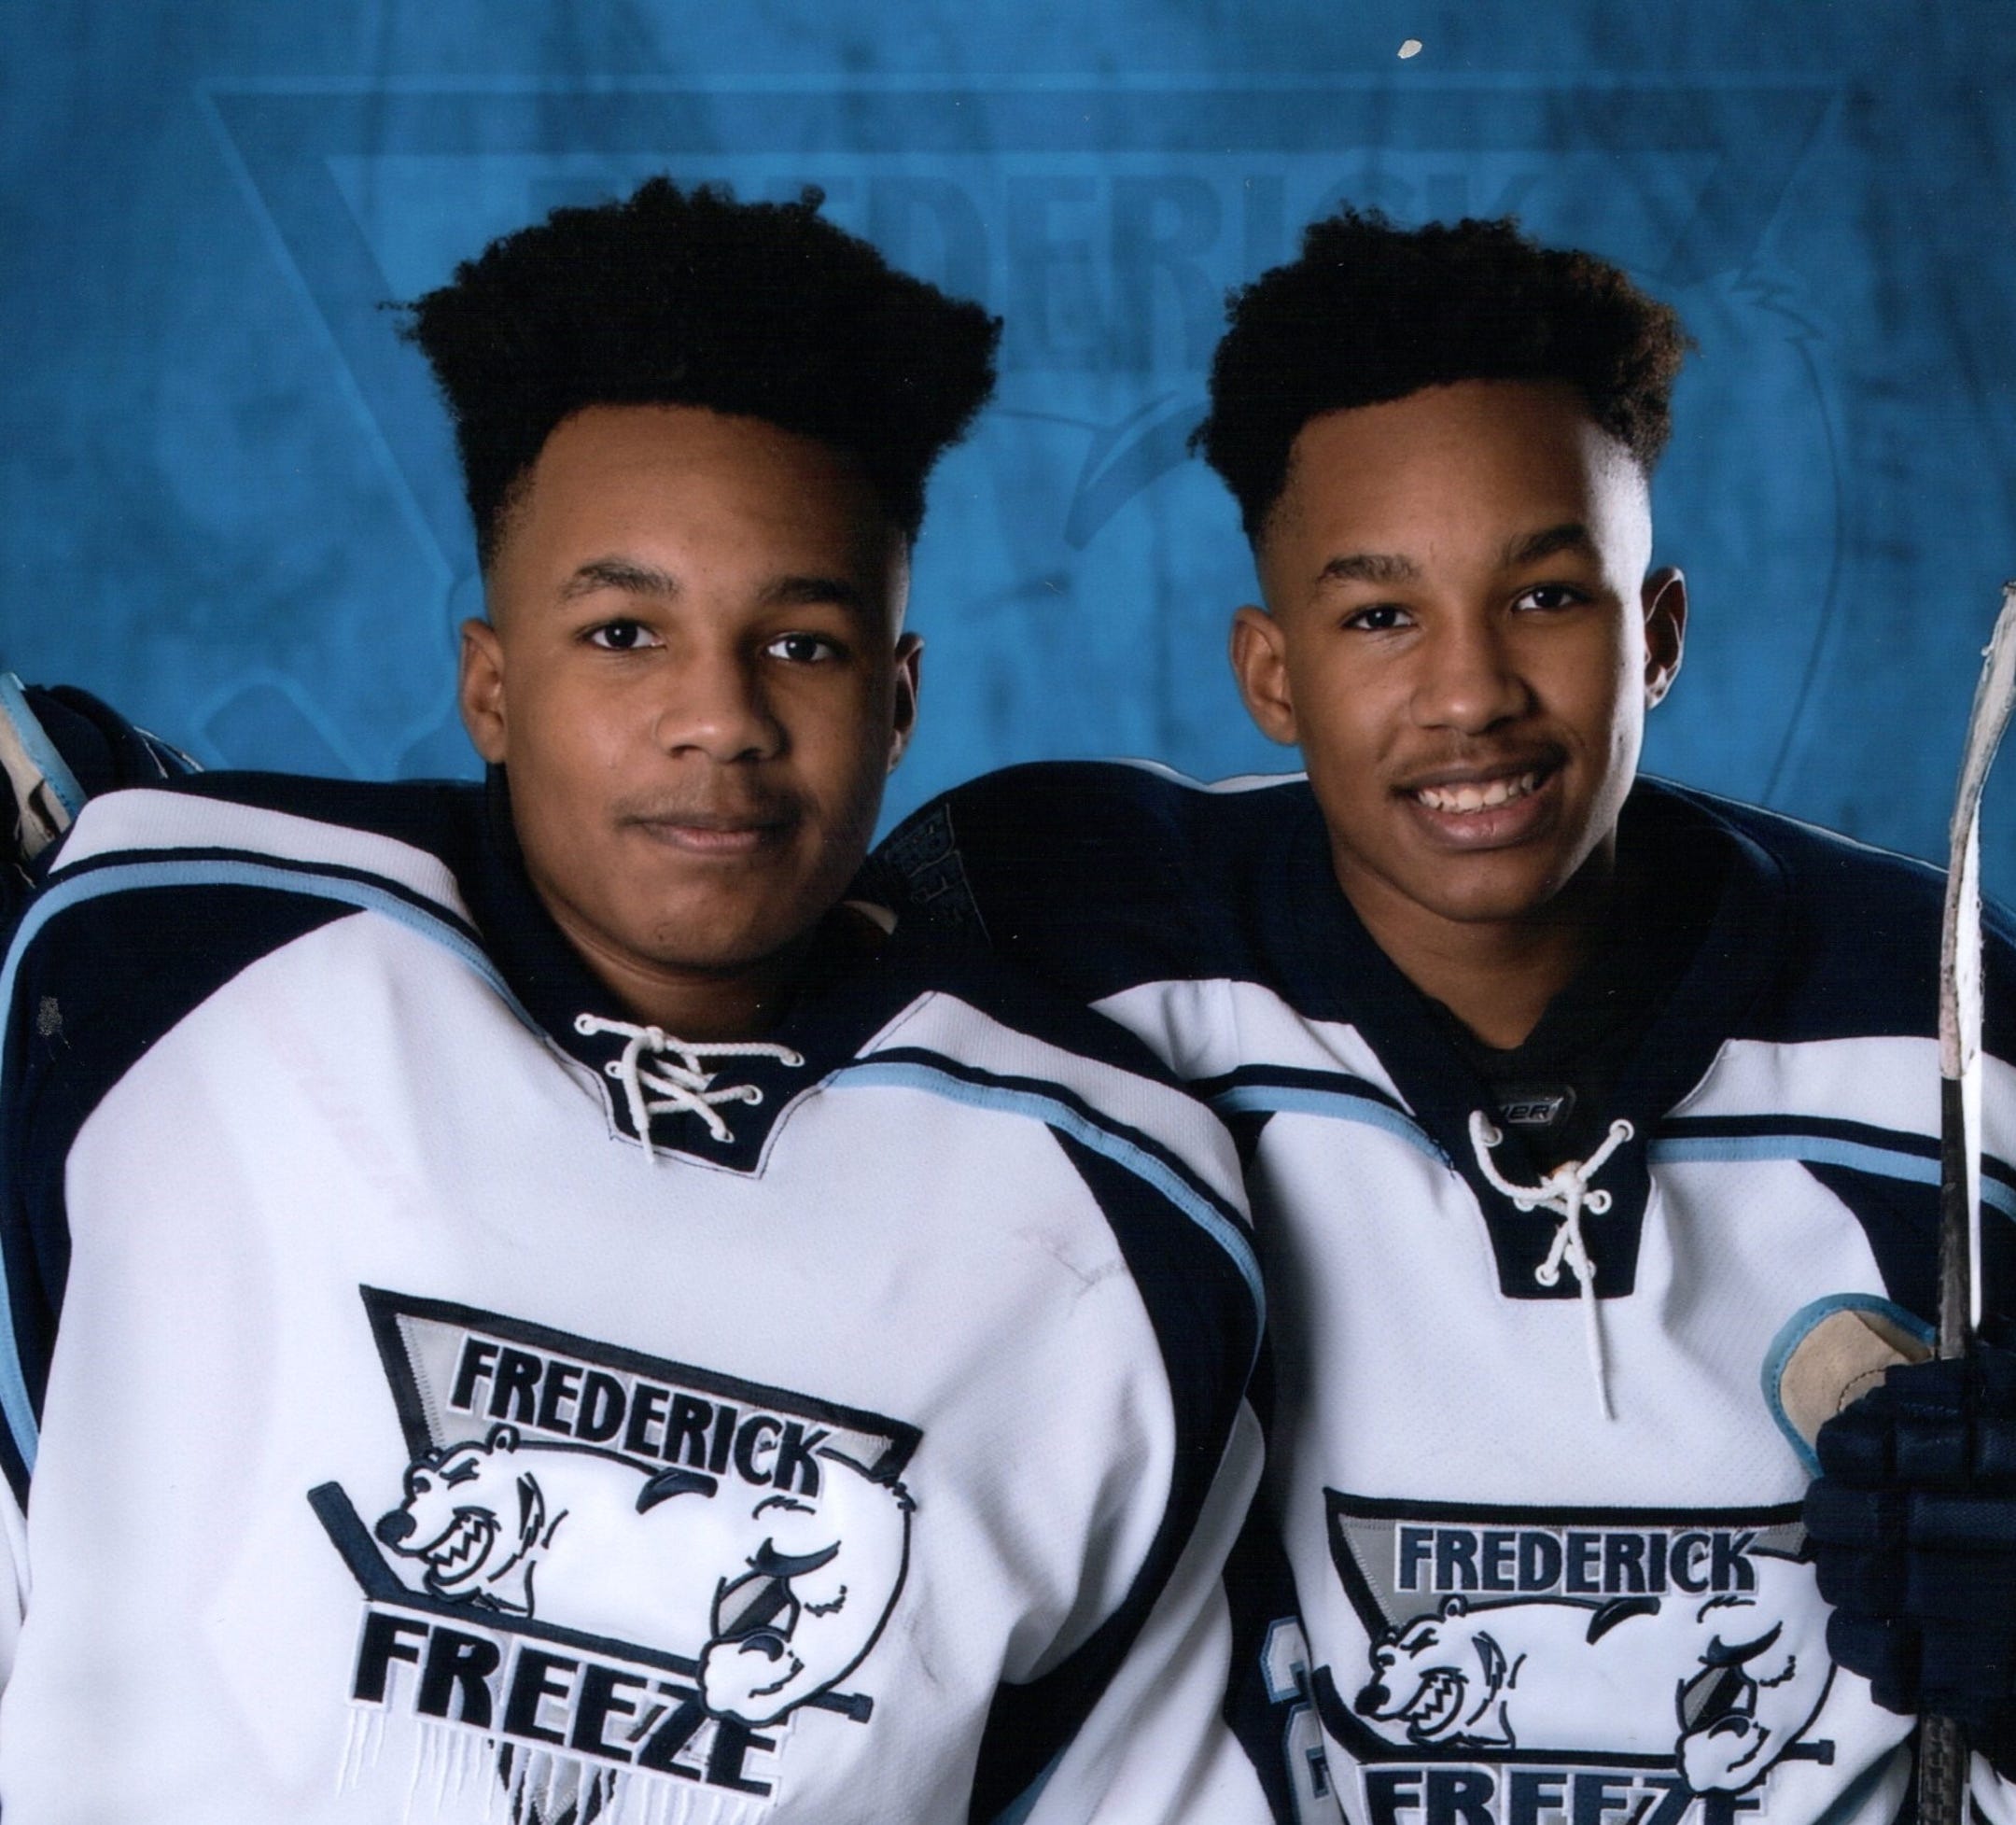 It's not right': Players want more from NHL against racism – Twin Cities